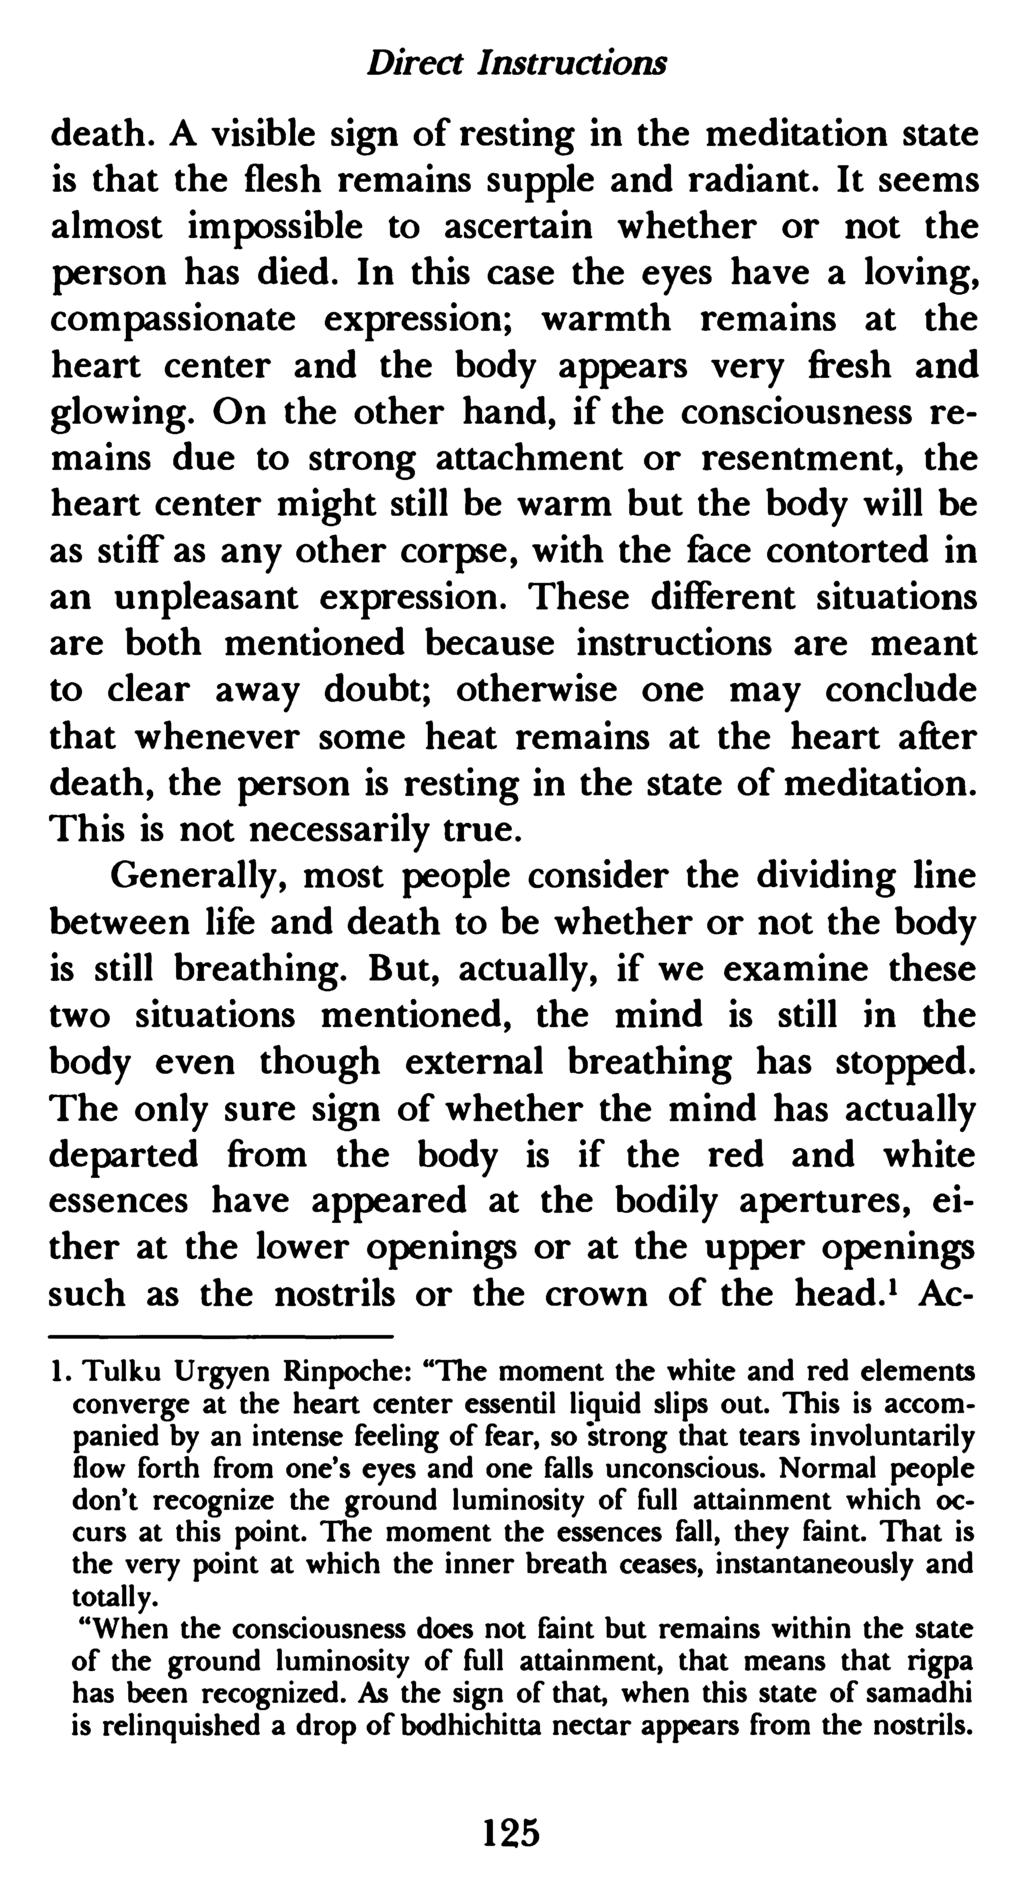 Direct Instructions death. A visible sign of resting in the meditation state is that the flesh remains supple and radiant. It seems almost impossible to ascertain whether or not the person has died.